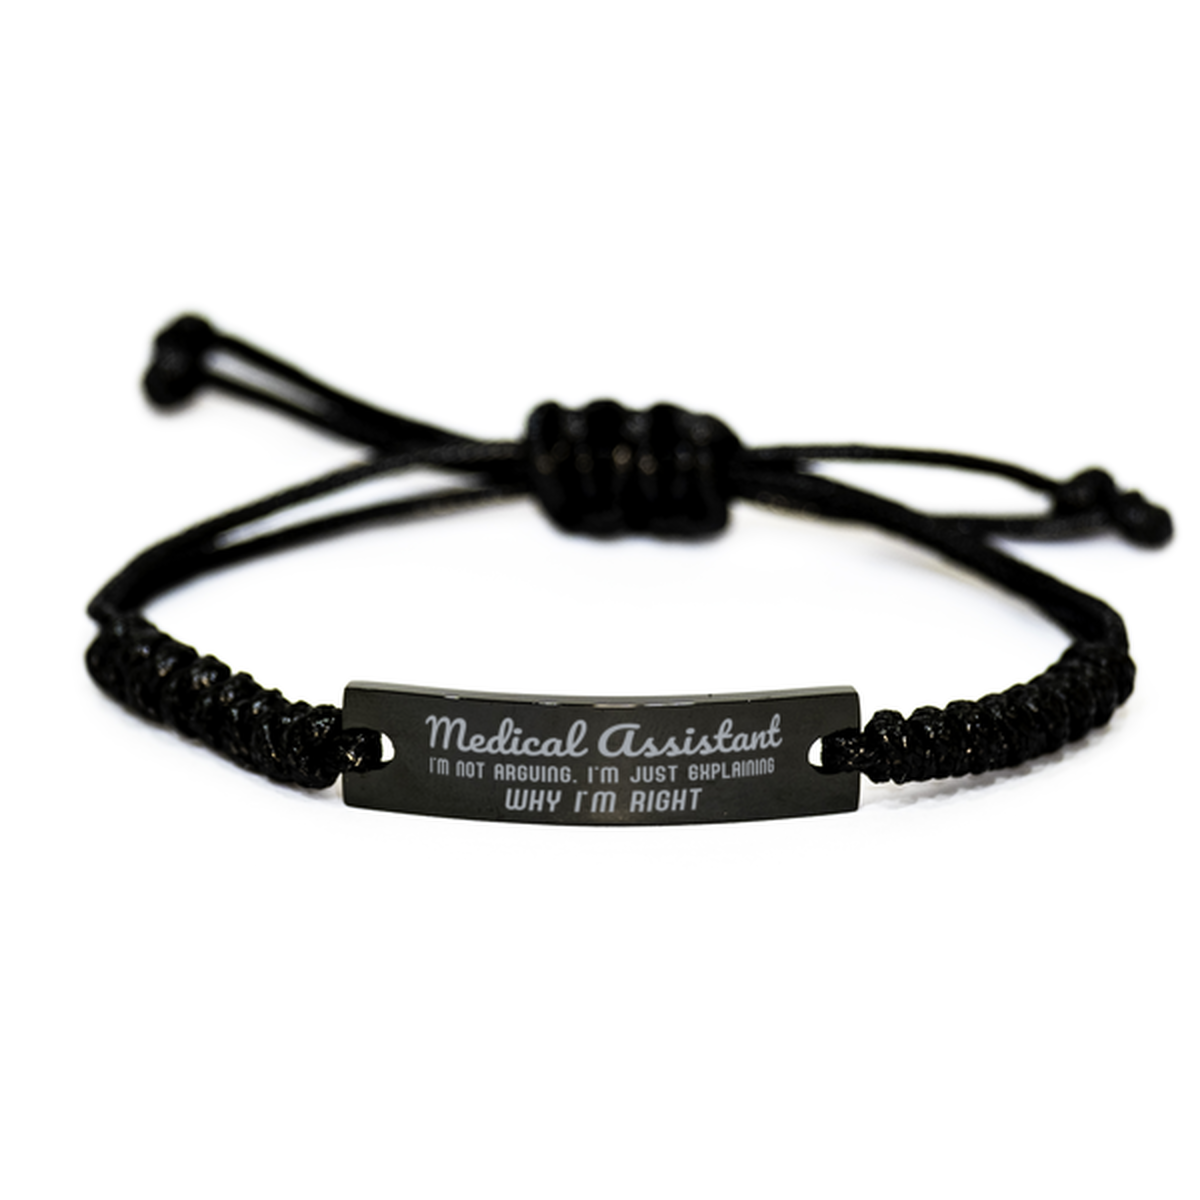 Medical Assistant I'm not Arguing. I'm Just Explaining Why I'm RIGHT Black Rope Bracelet, Funny Saying Quote Medical Assistant Gifts For Medical Assistant Graduation Birthday Christmas Gifts for Men Women Coworker